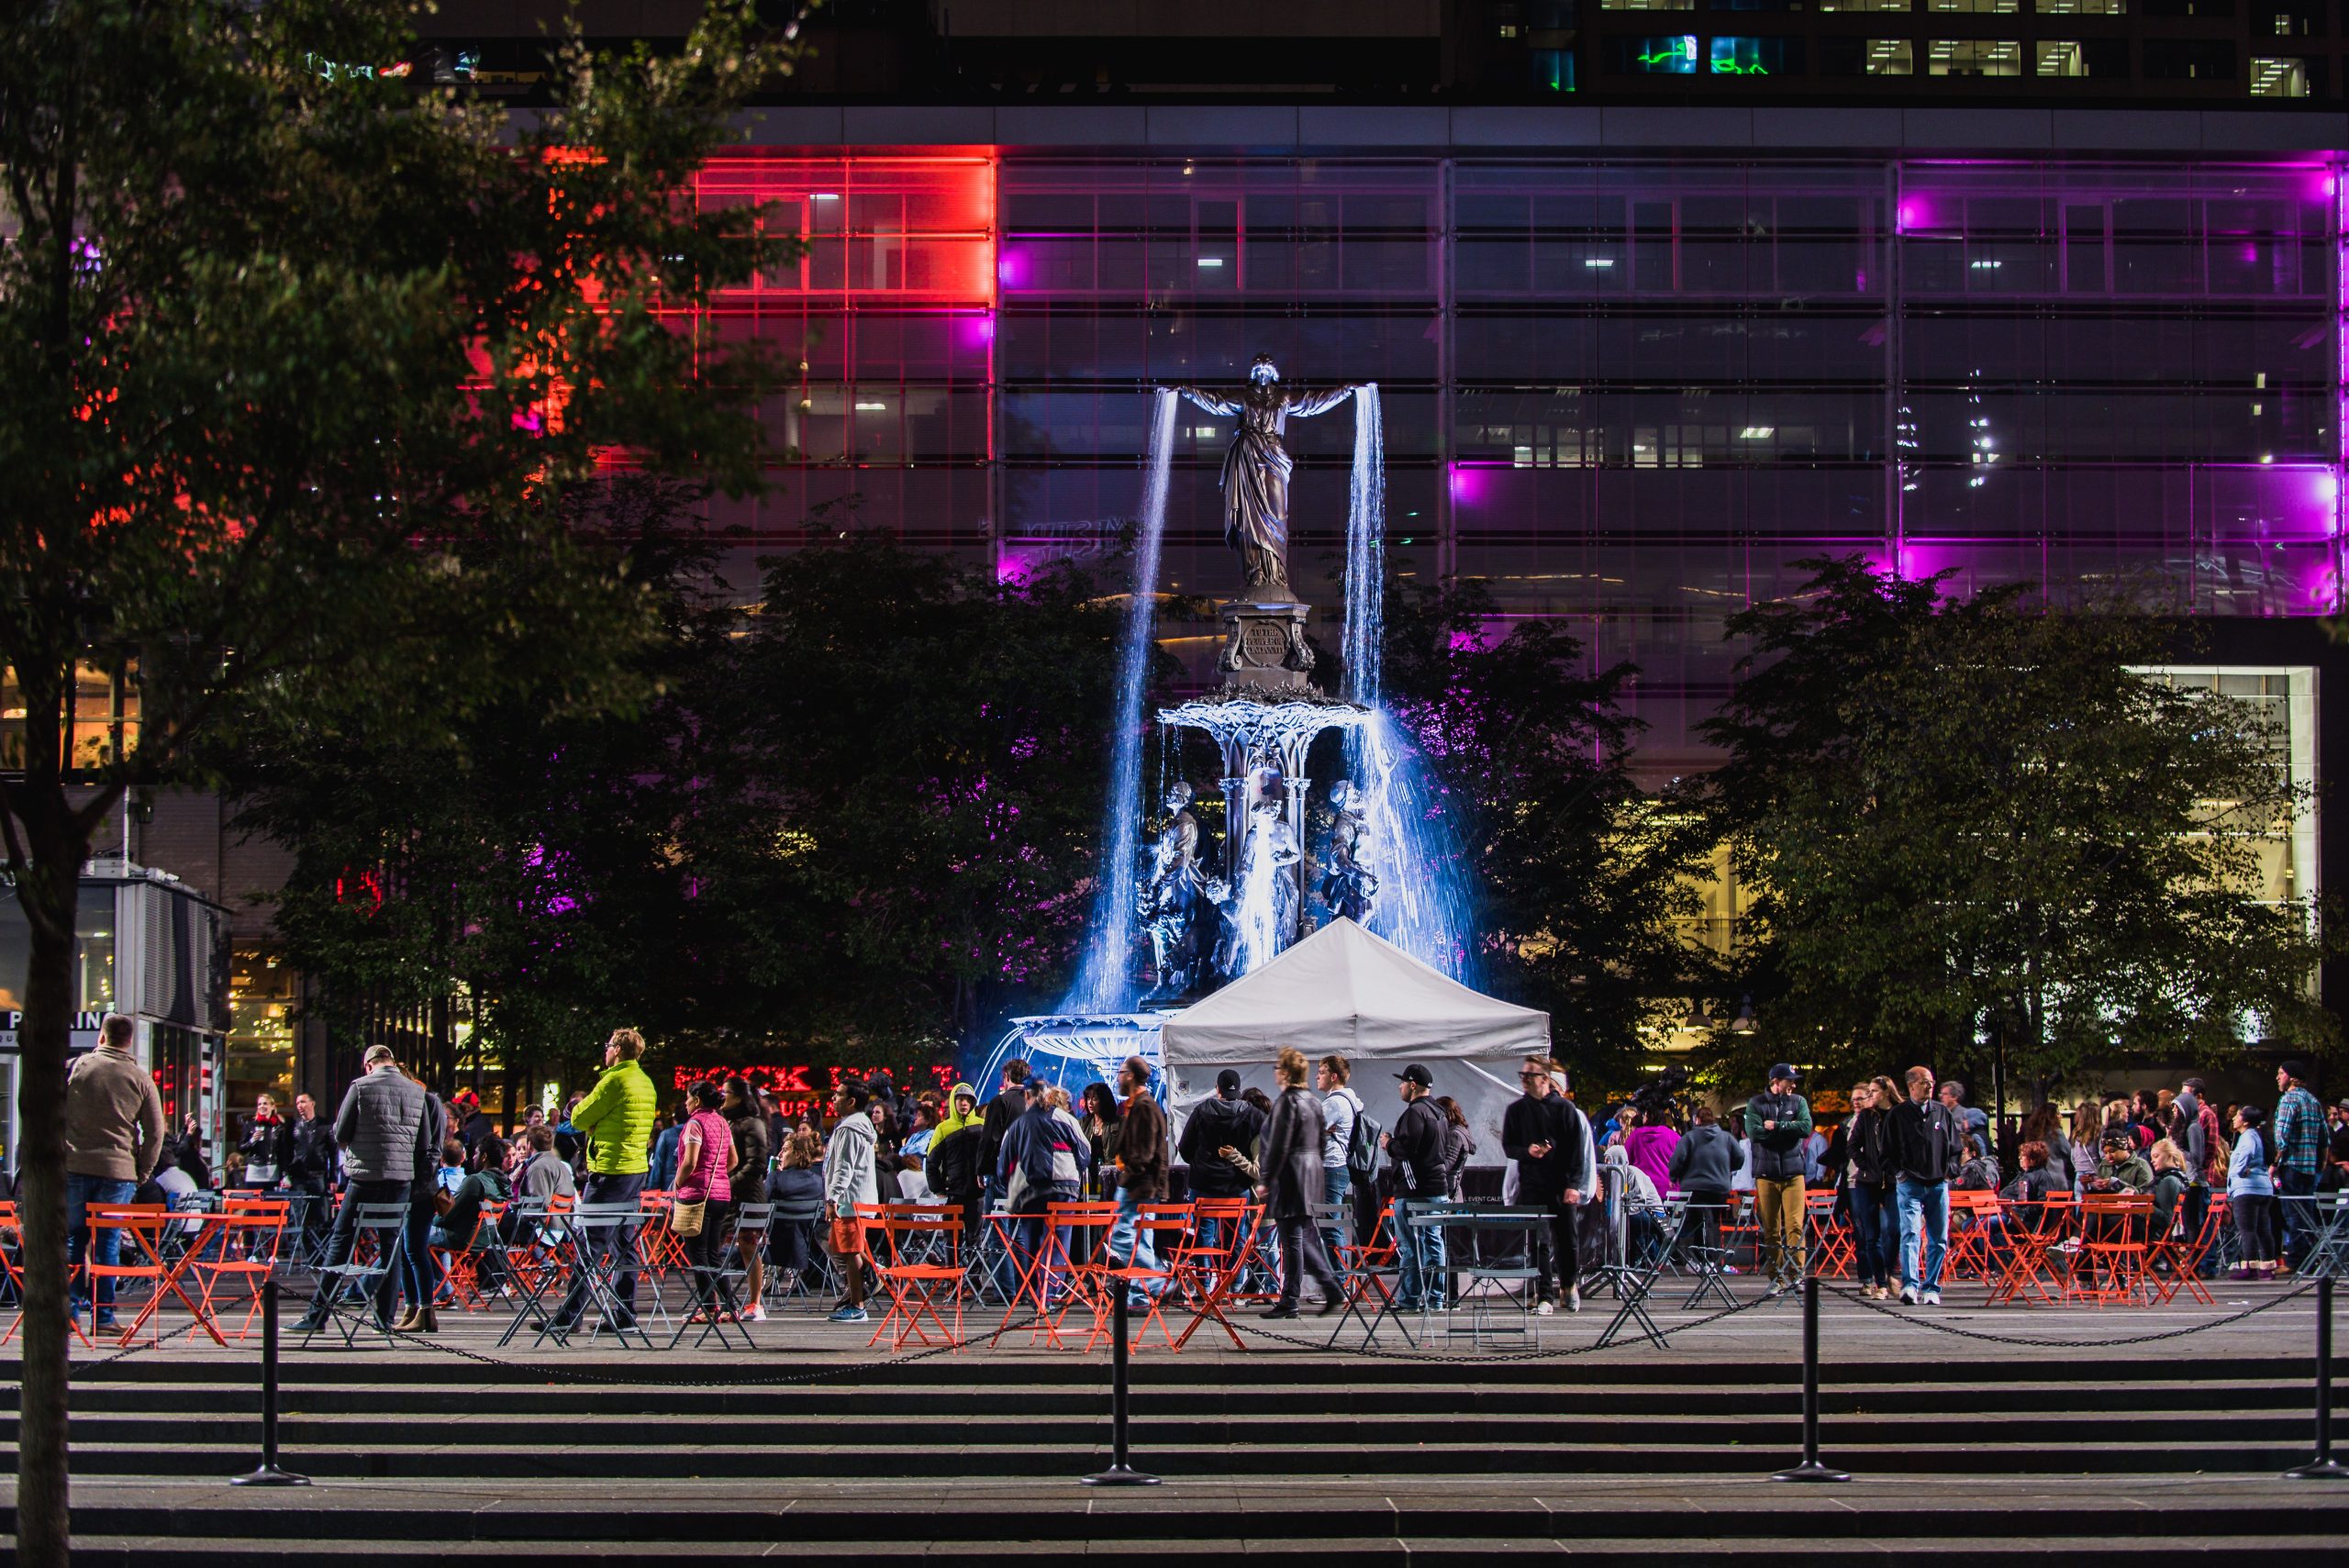 BLINK at Fountain Square is a popular summer entertainment in cincinnati